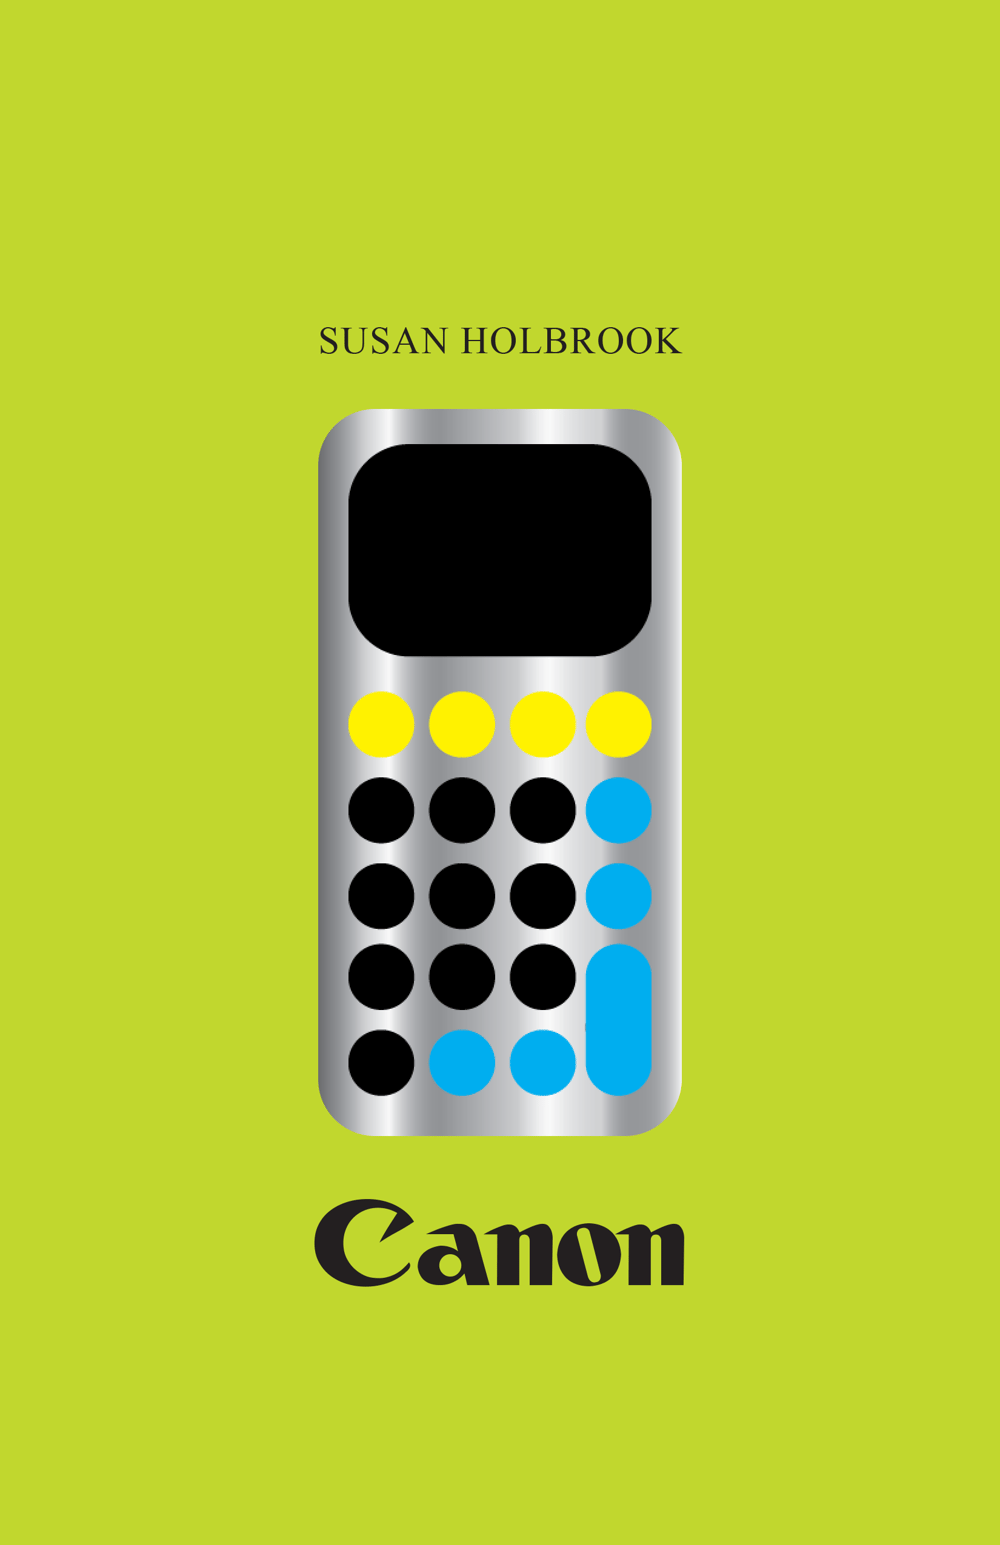 Image of "Canon" by Susan Holbrook